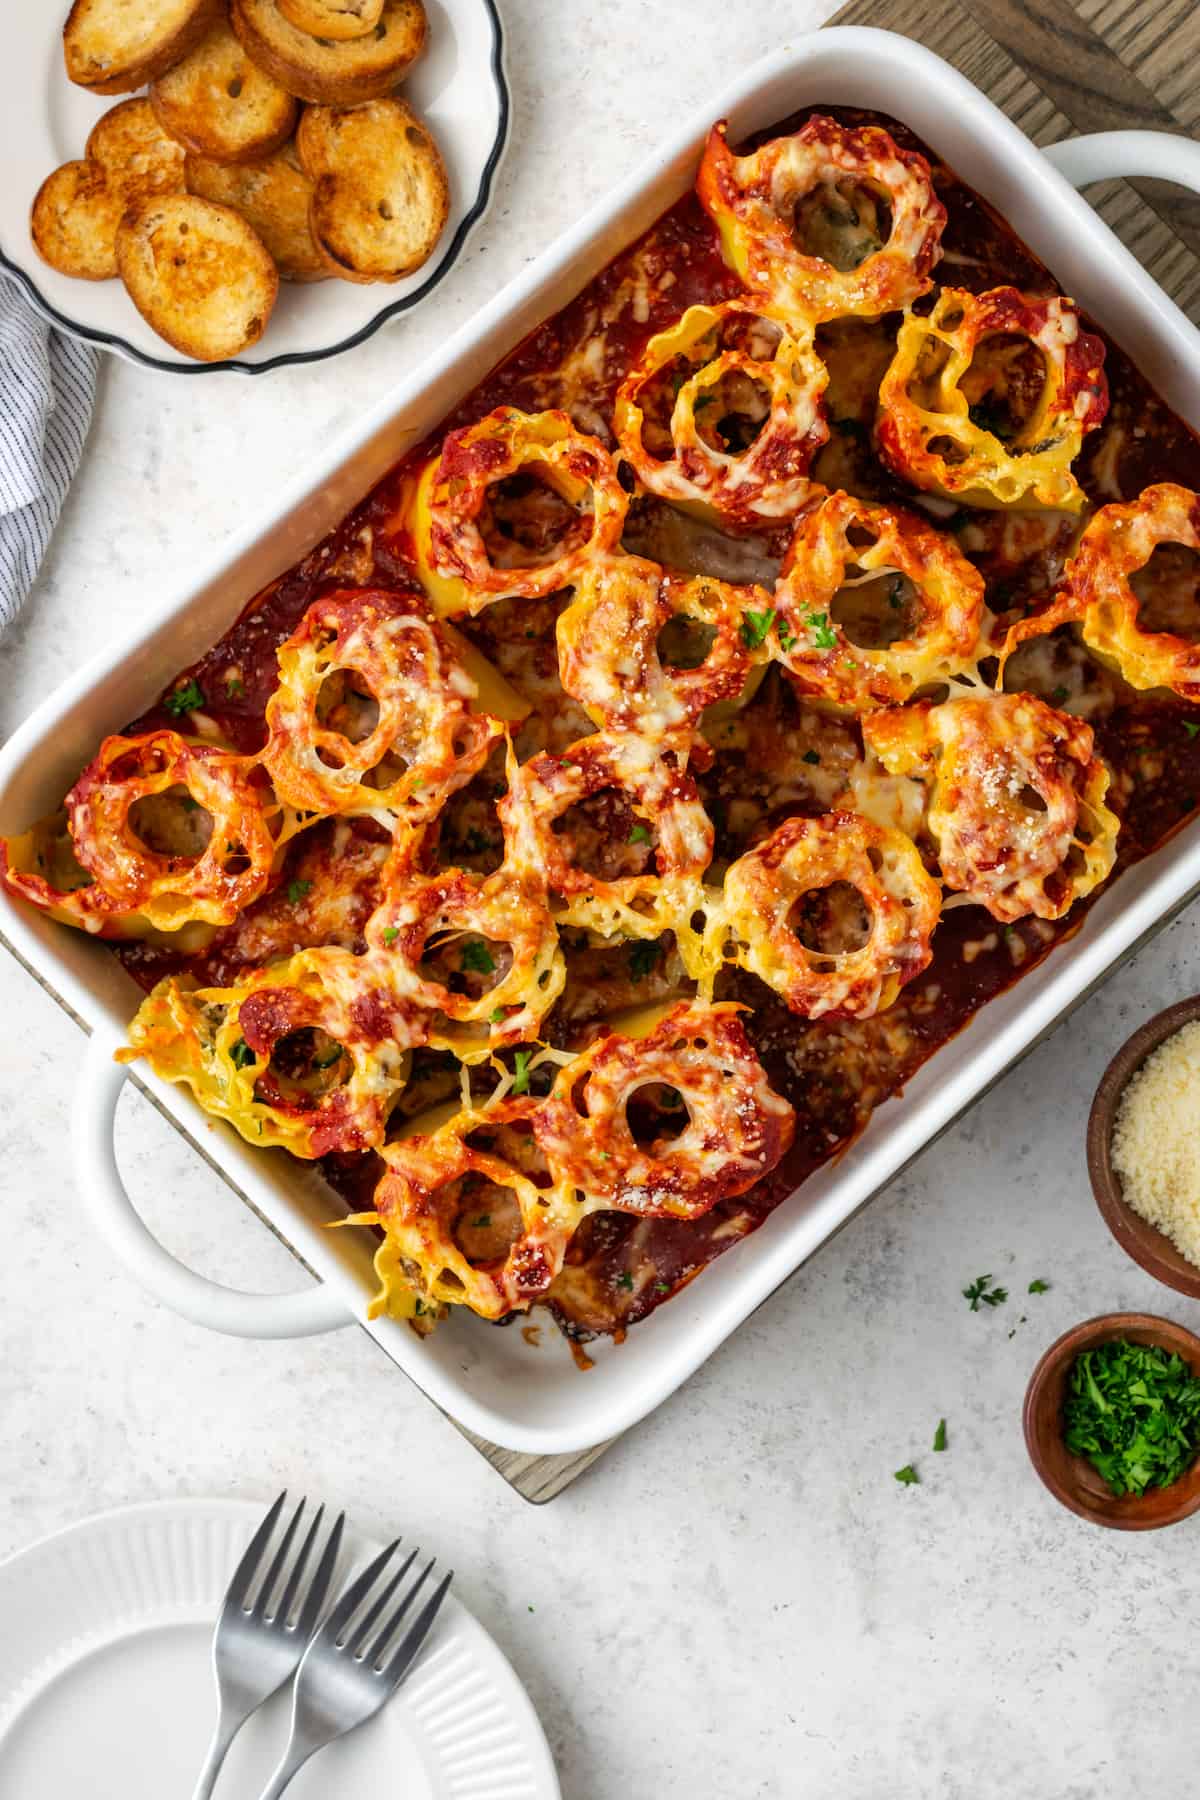 A large casserole dish with baked vegetable lasagna roll ups and a plate of toasted bread points to the side.